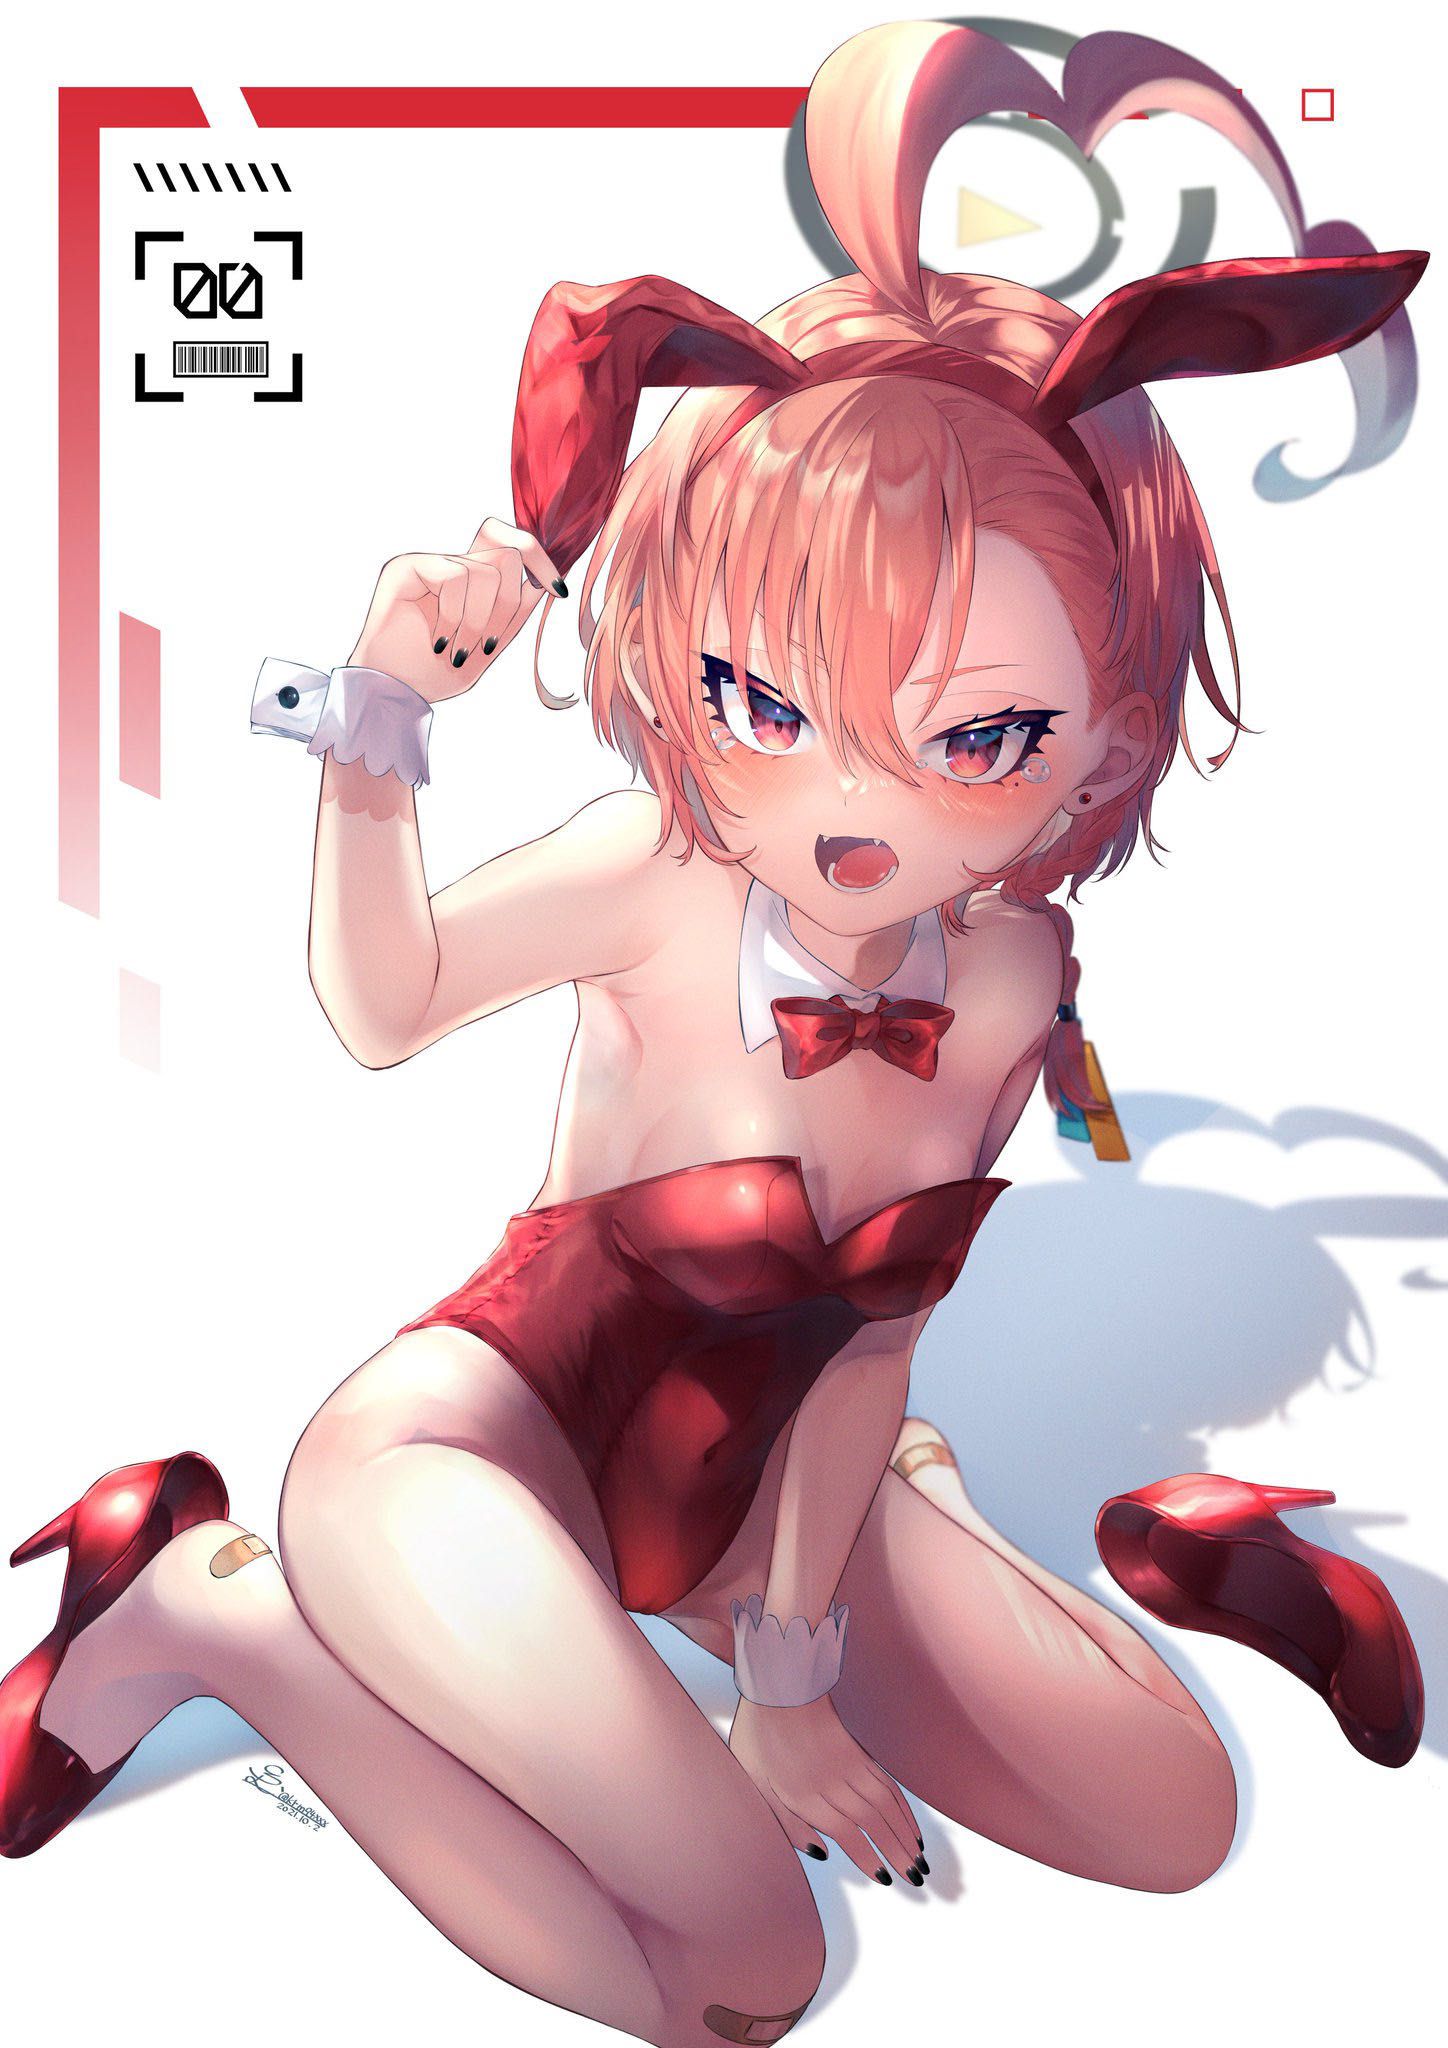 【Lori Bunny-chan】 Secondary erotic image that makes you want to see the moon with Usagi chan in the rabbit ear bunny girl of the secondary loli girl 30